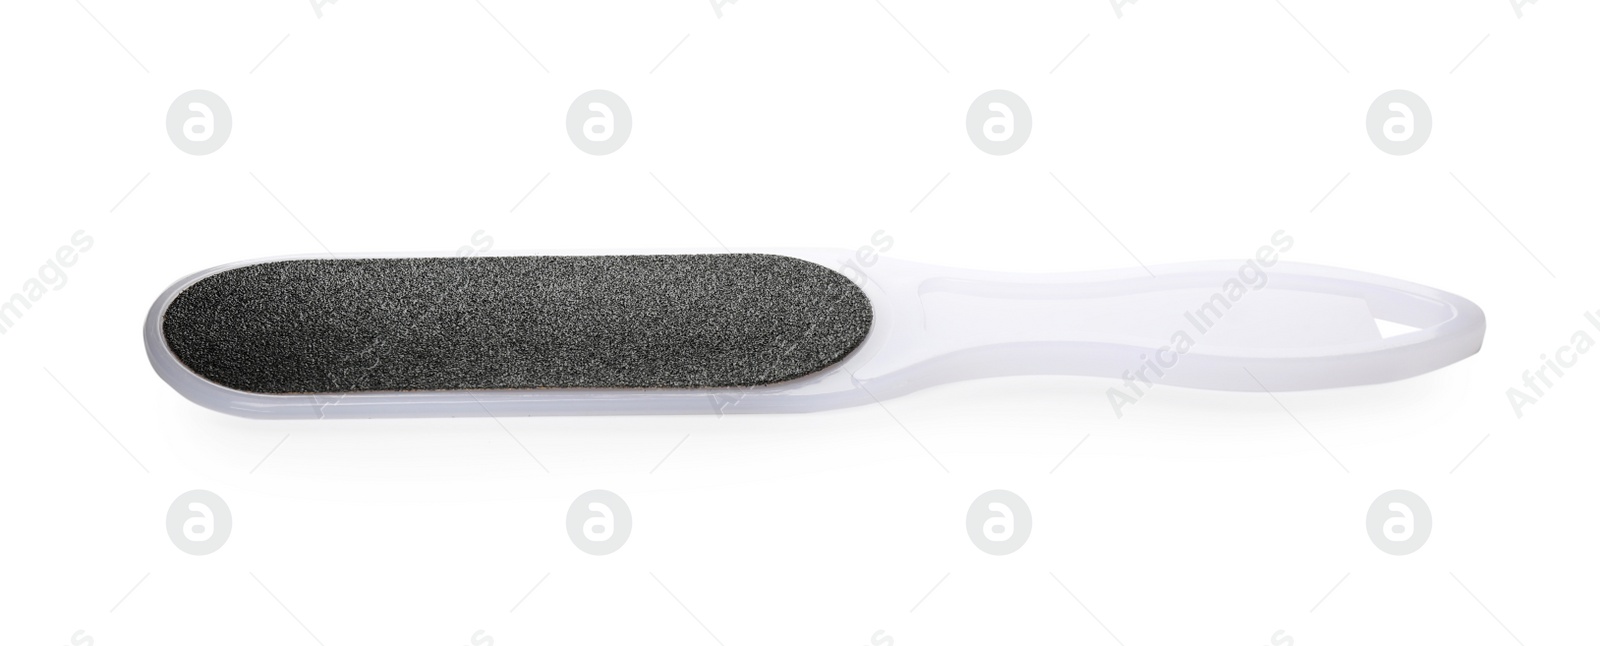 Photo of Foot file on white background. Pedicure tool